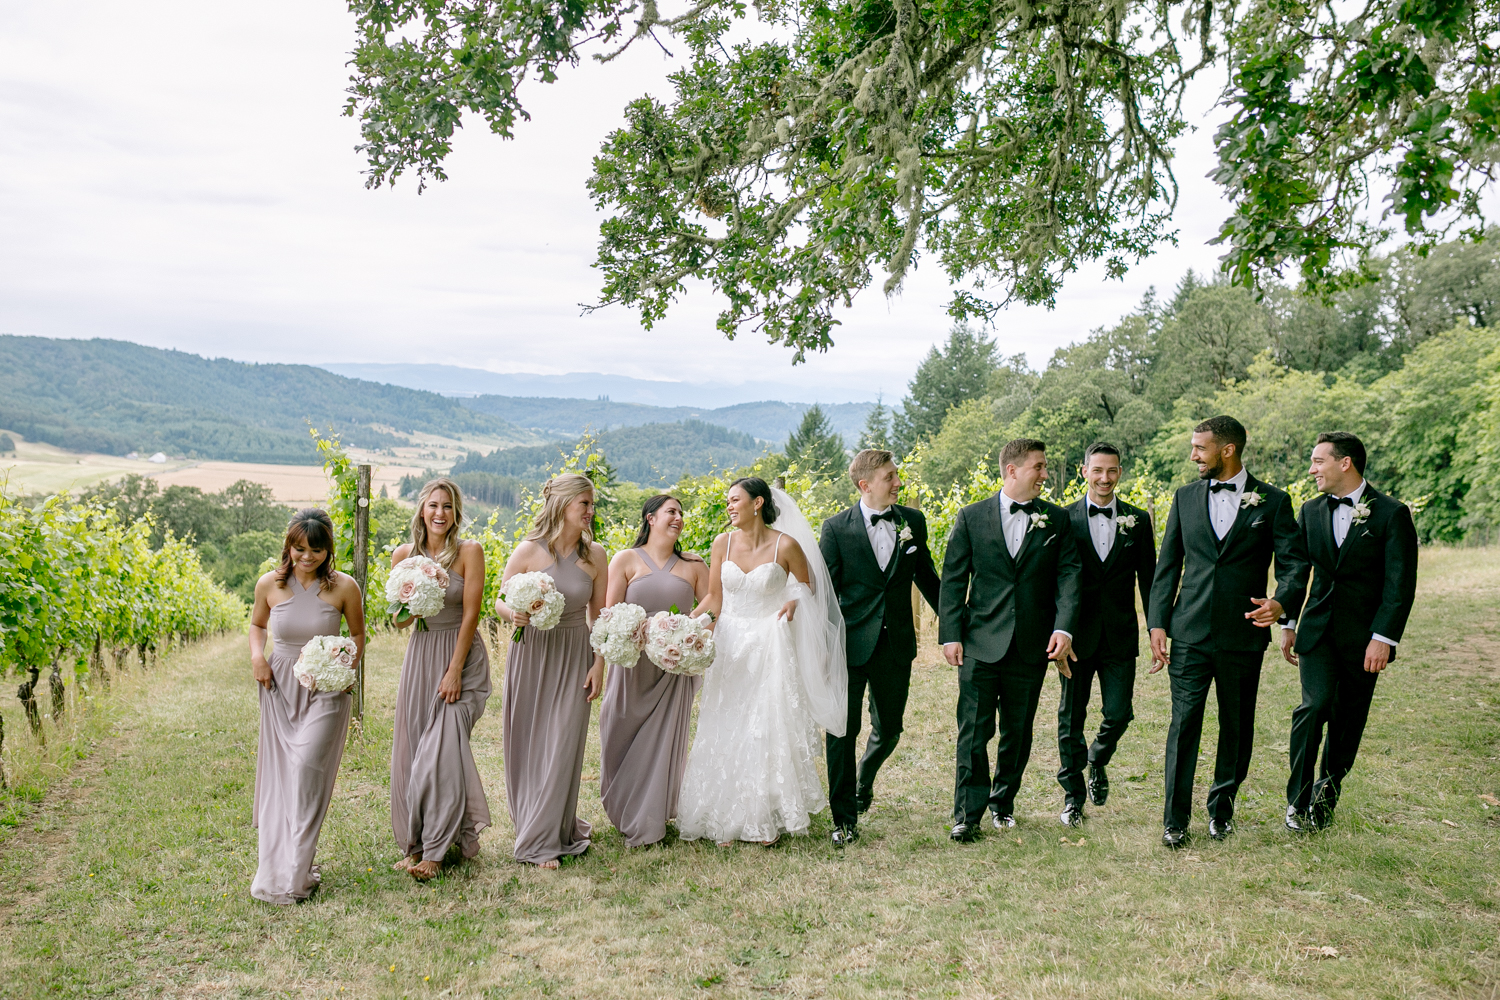 Youngberg Hill Vineyard Wedding in Wine Country Oregon - Corrie Mick Photography-138.jpg